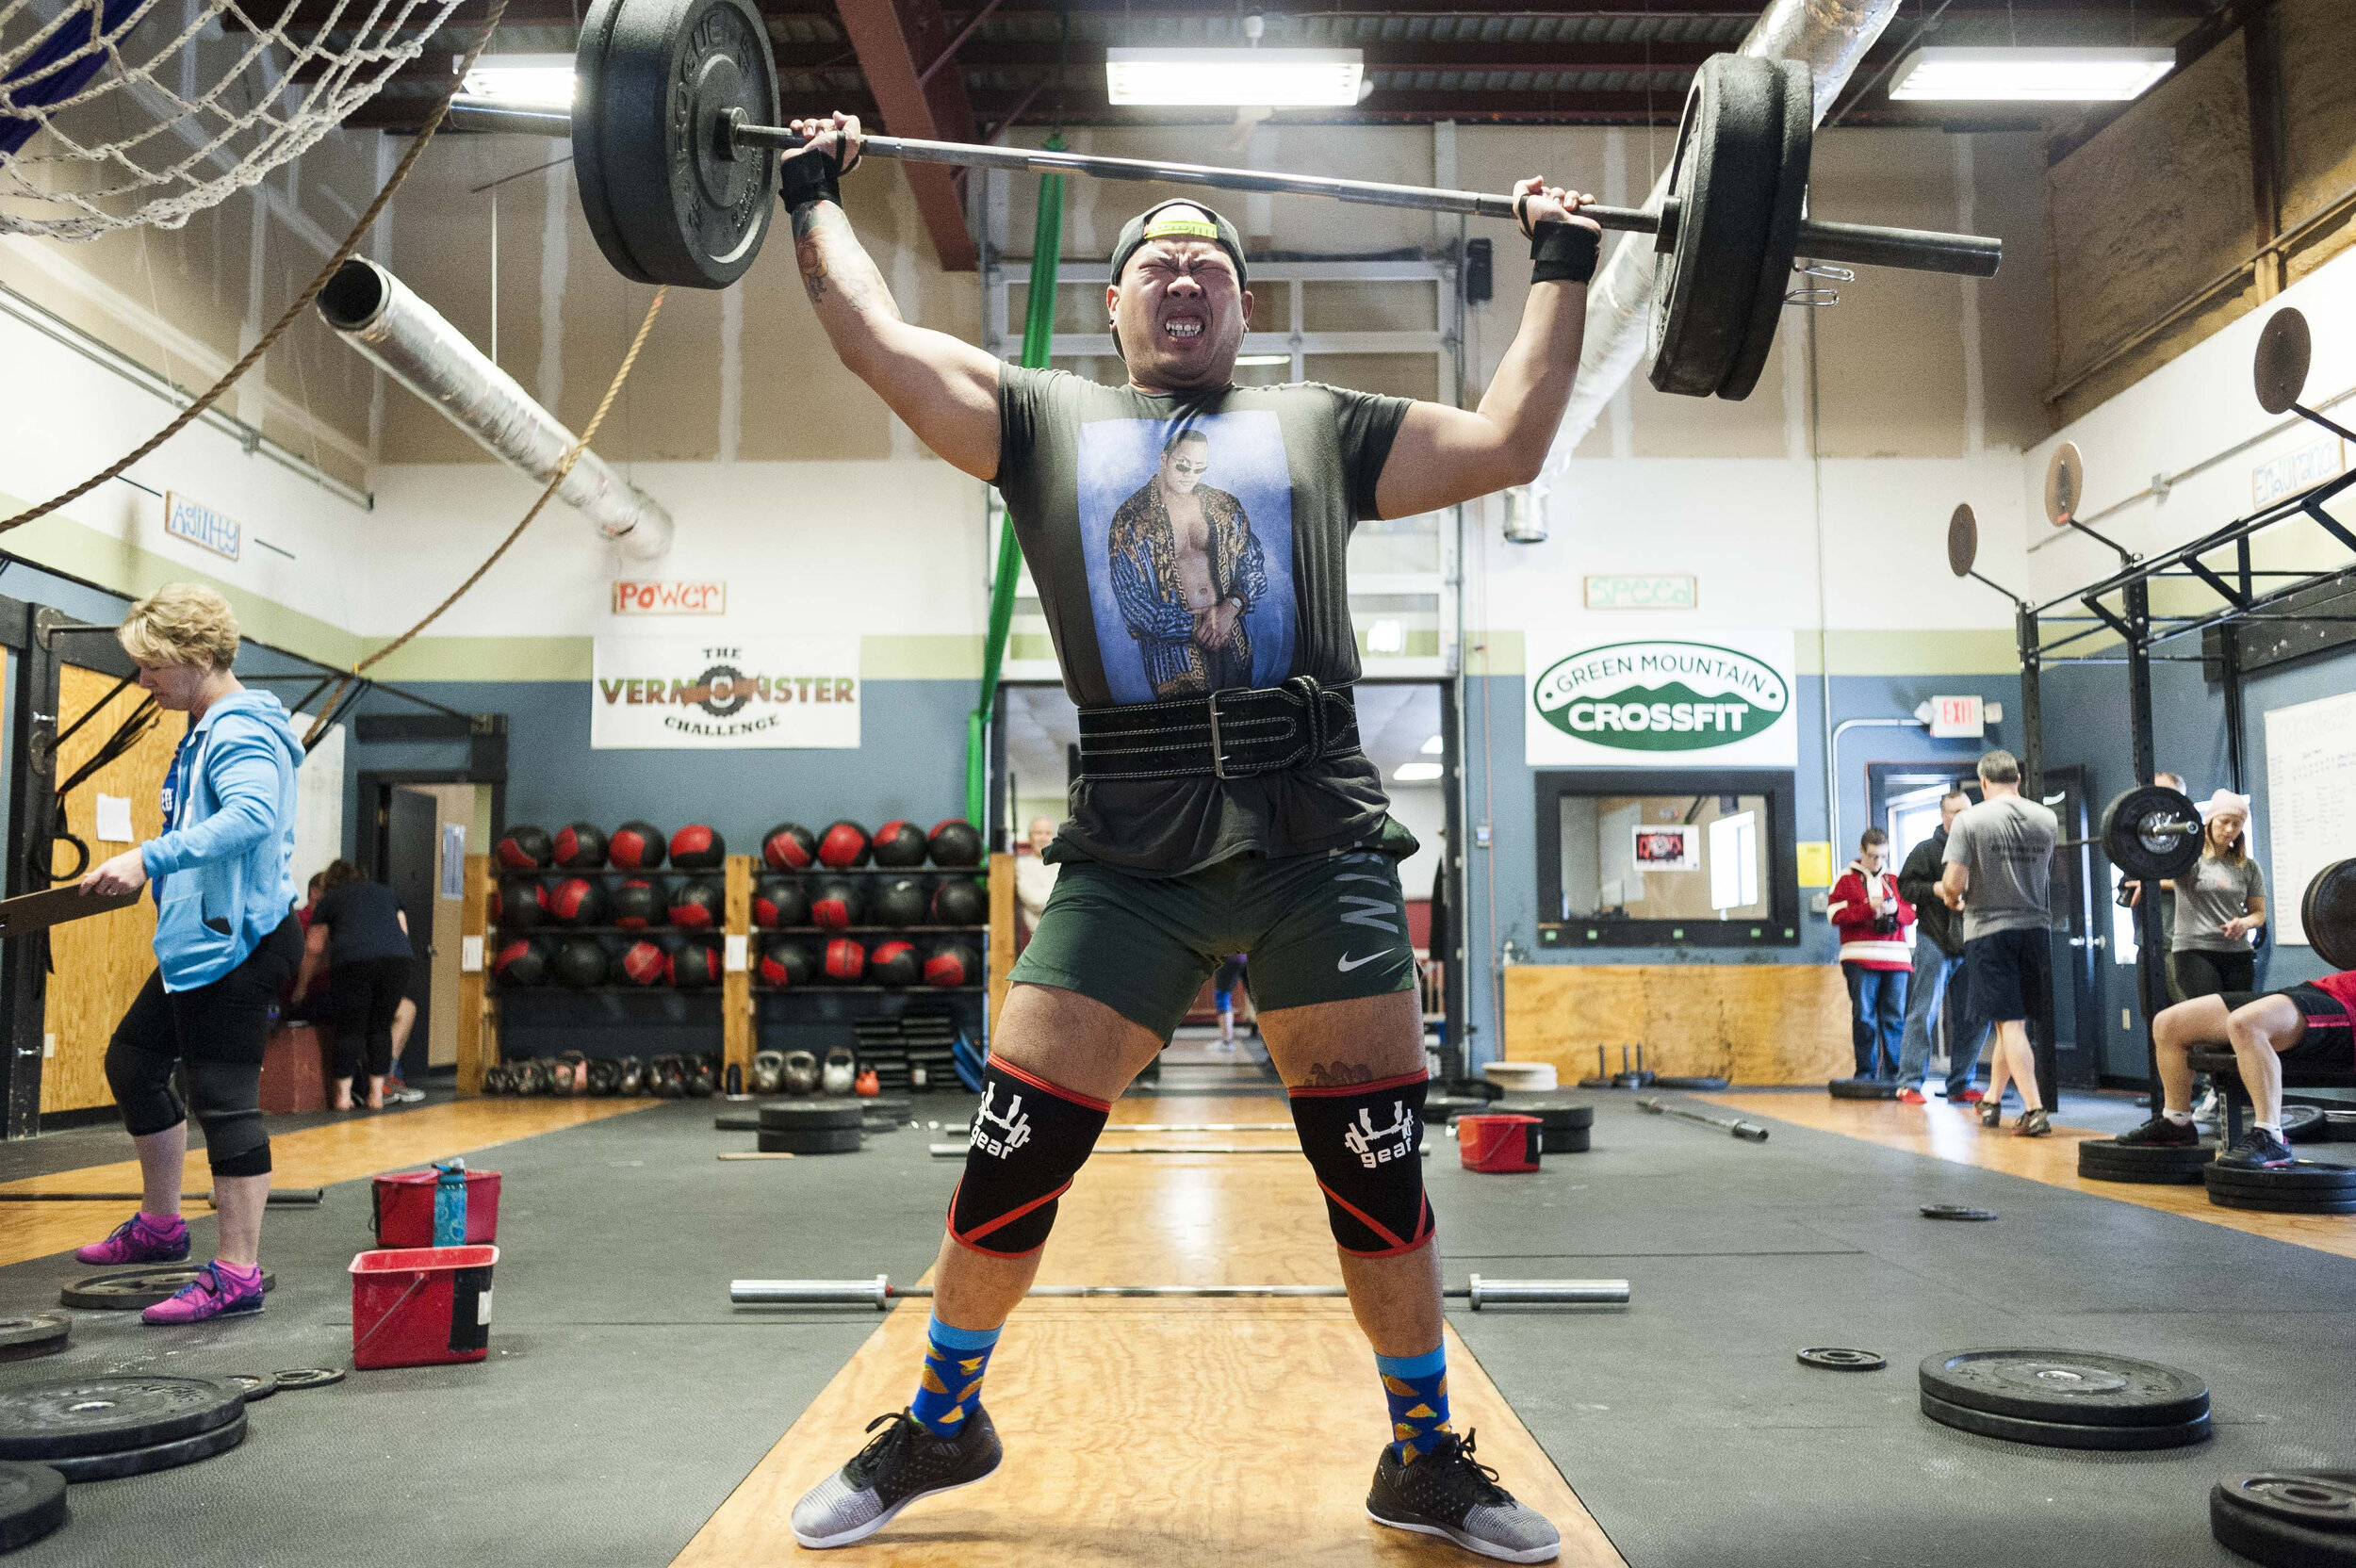  Narin Phanthakhot successfully completes a "clean and jerk" lift Saturday, January 20th 2018 at Green Mountain Crossfit in Barre, VT during their annual "Lift Up!" Fundraiser.  